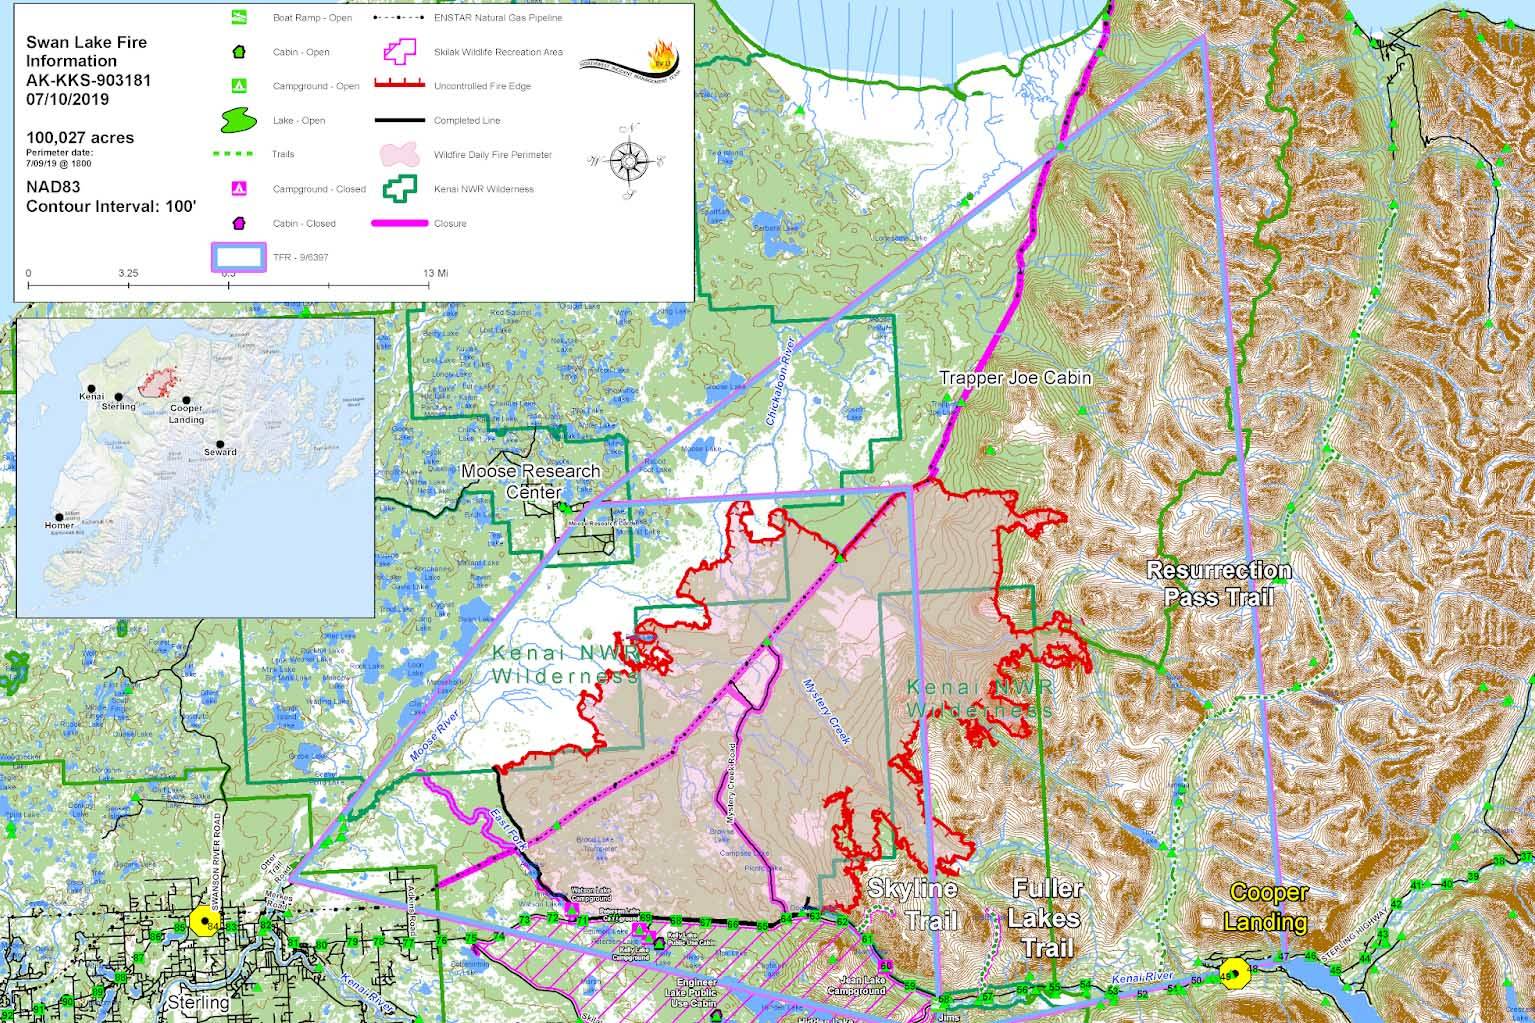 Northwest 13 Incident Management Team                                 A map of the Swan Lake Fire as of Wednesday.